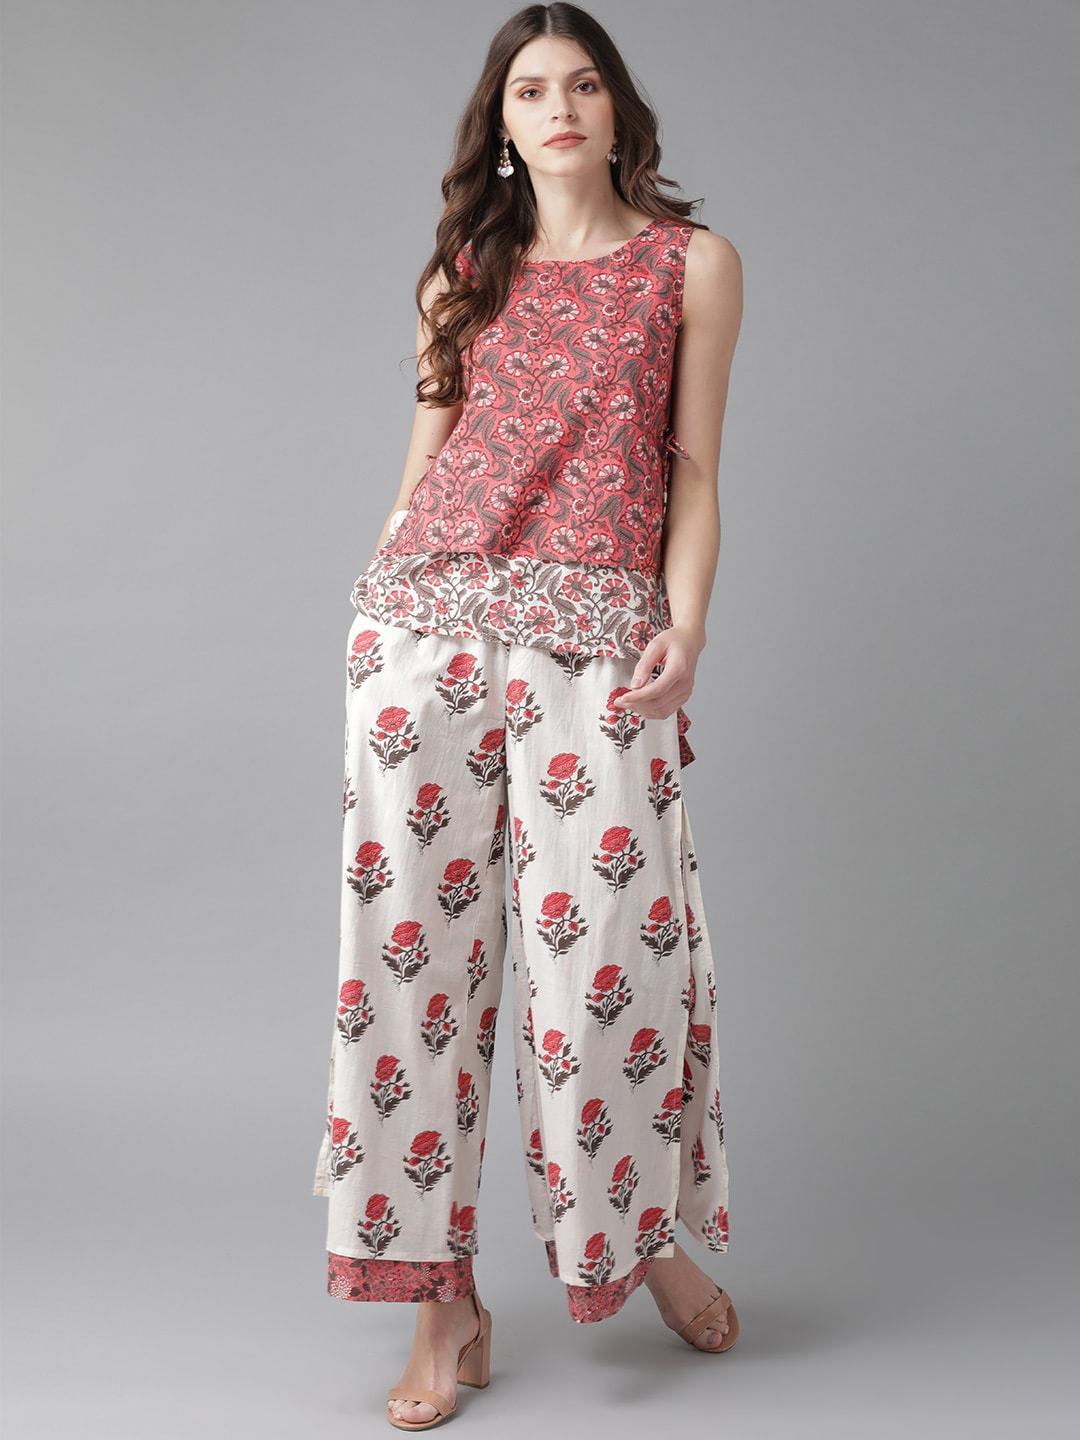 Women's  Printed Top with Palazzos - AKS